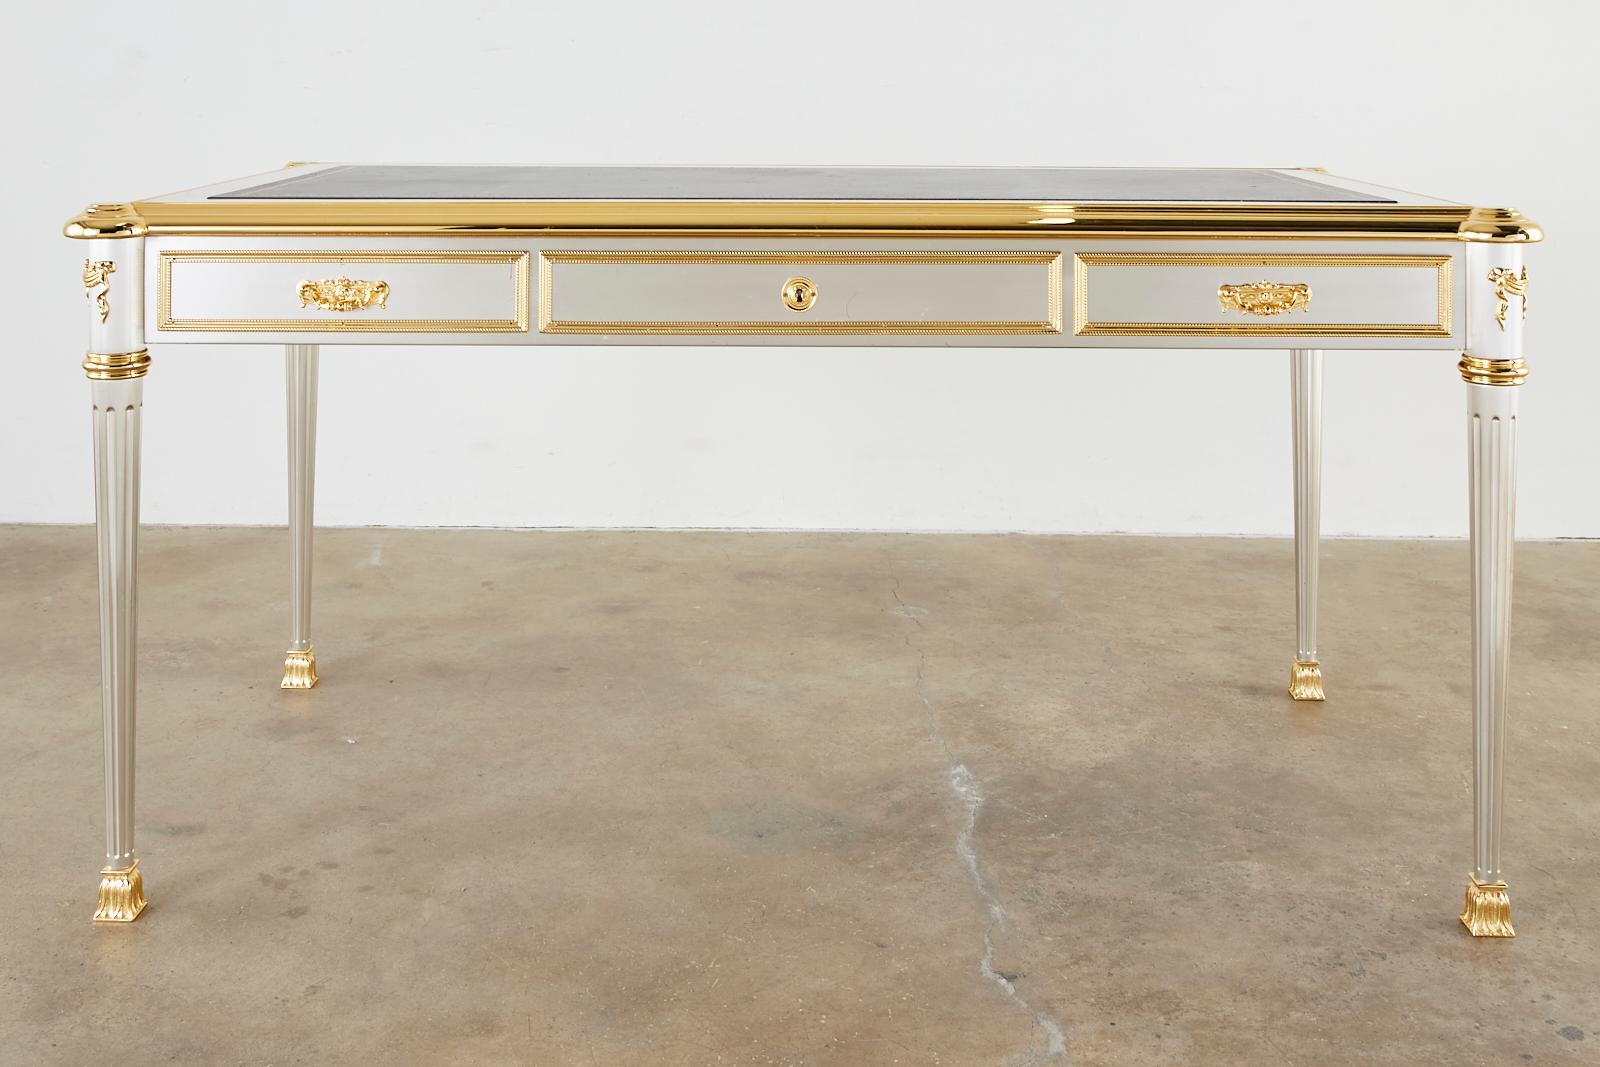 Extraordinary mid-century modern stainless steel and bronze writing table, desk, or bureau plat designed by John Vesey (American 1924-1992). Made in the grand neoclassical French Louis XVI taste featuring polished gilt bronze trim and an iconic